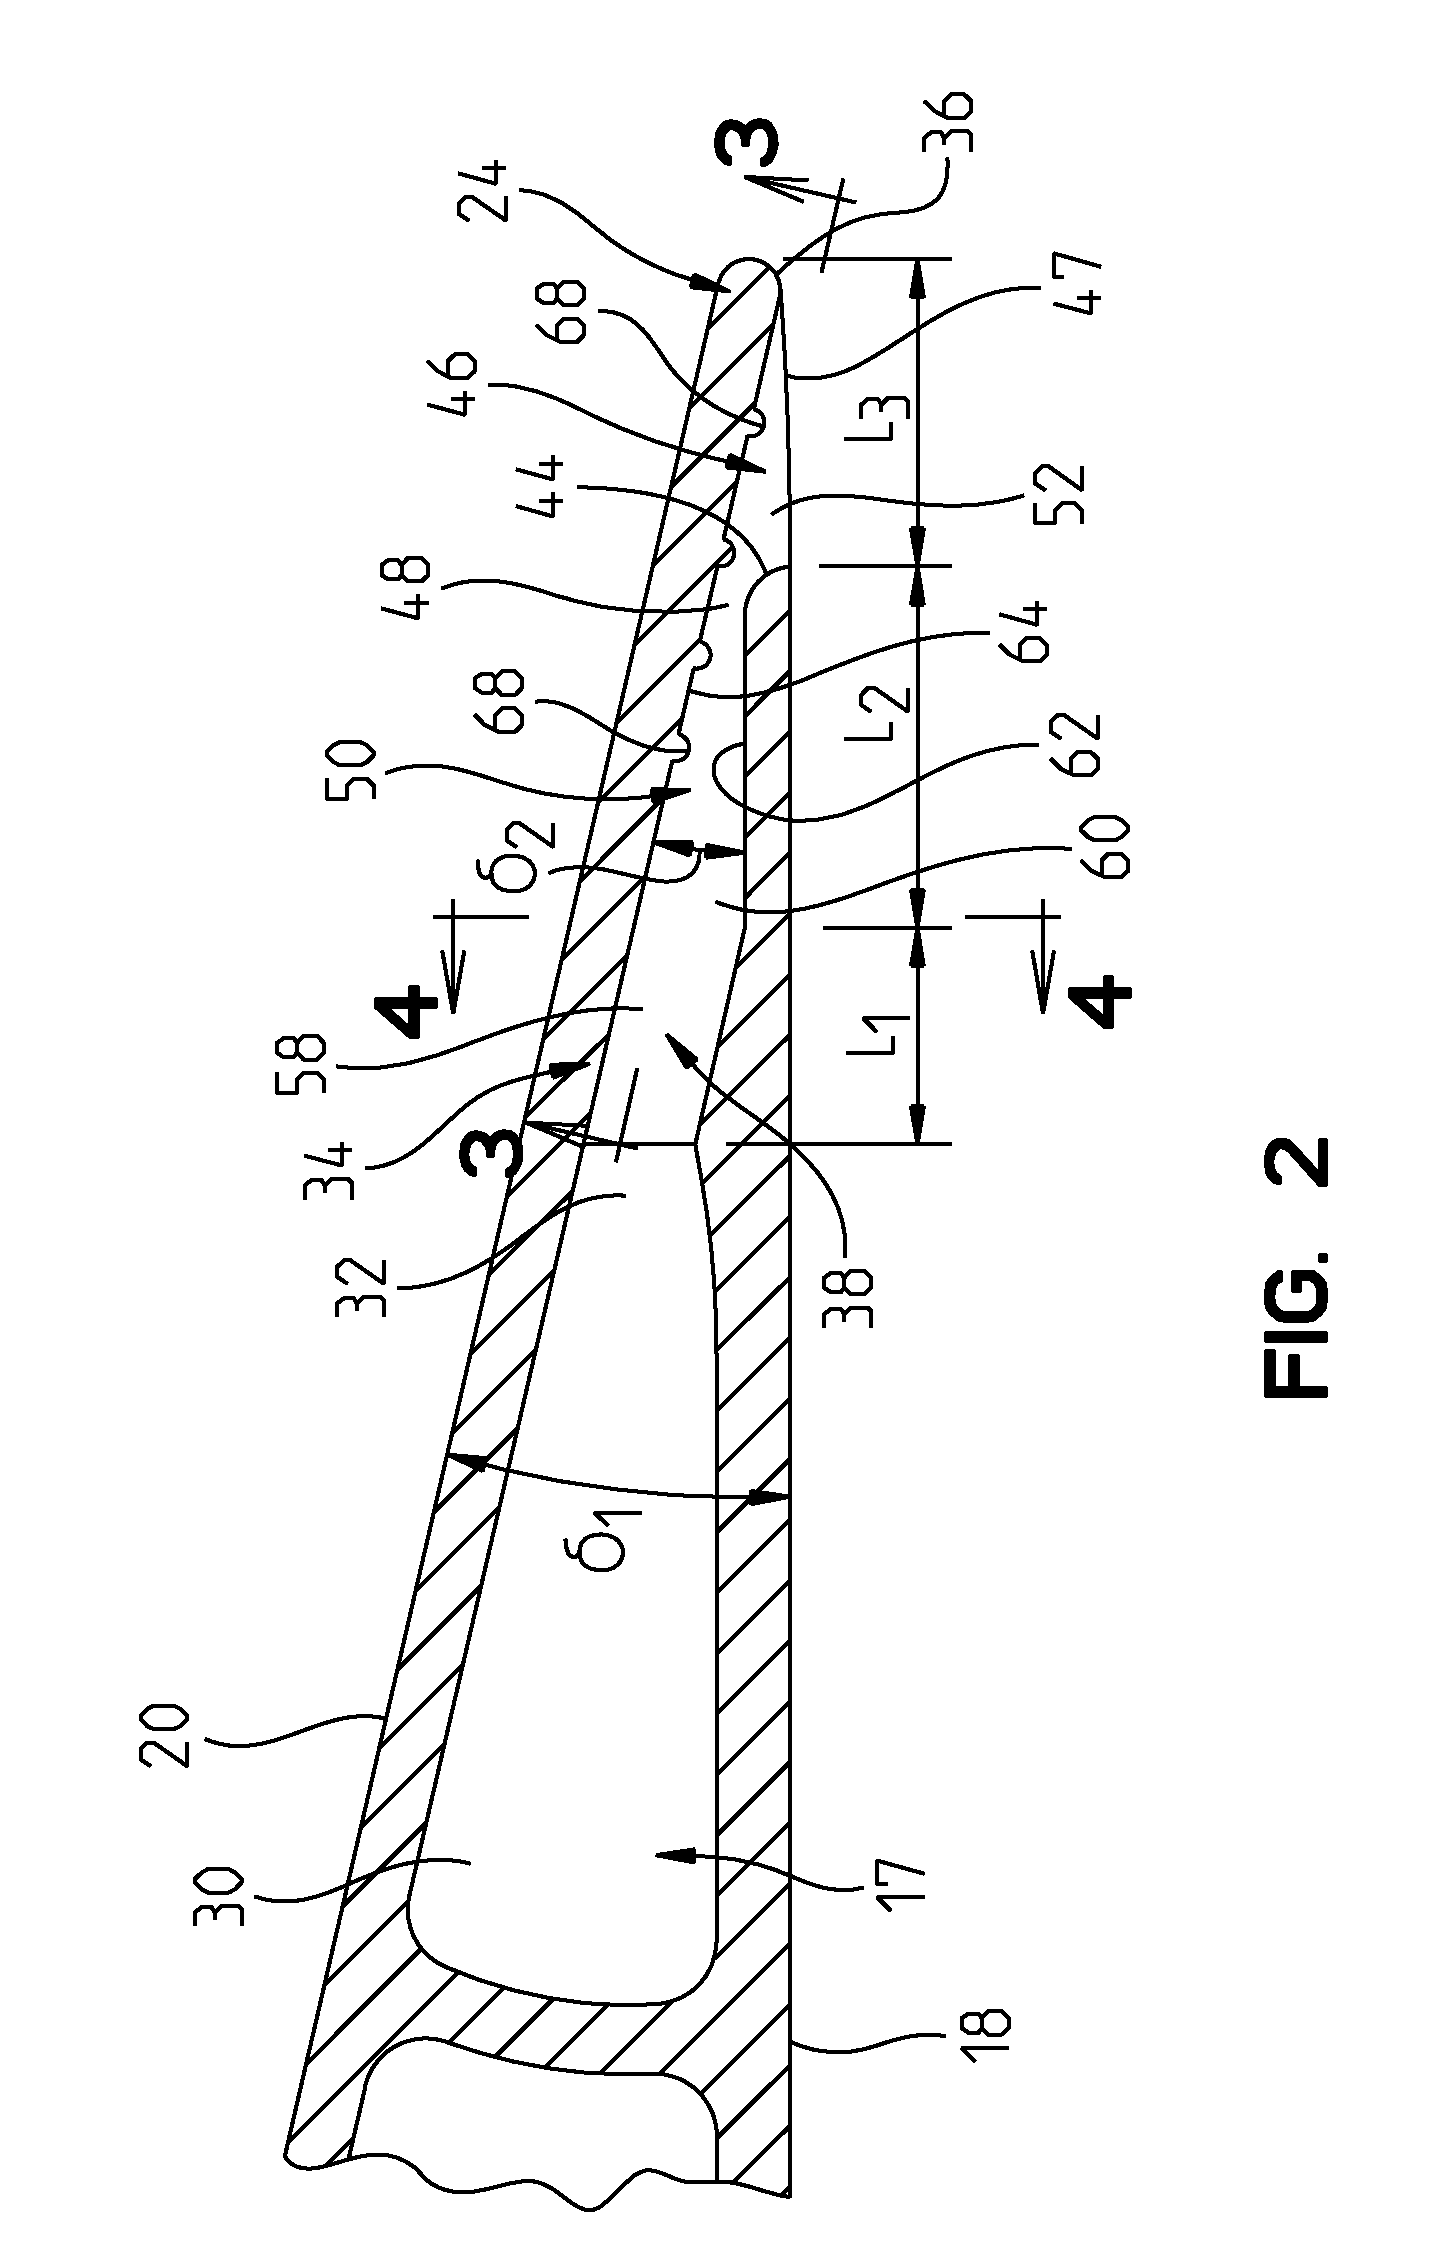 Trailing edge cooling slot configuration for a turbine airfoil